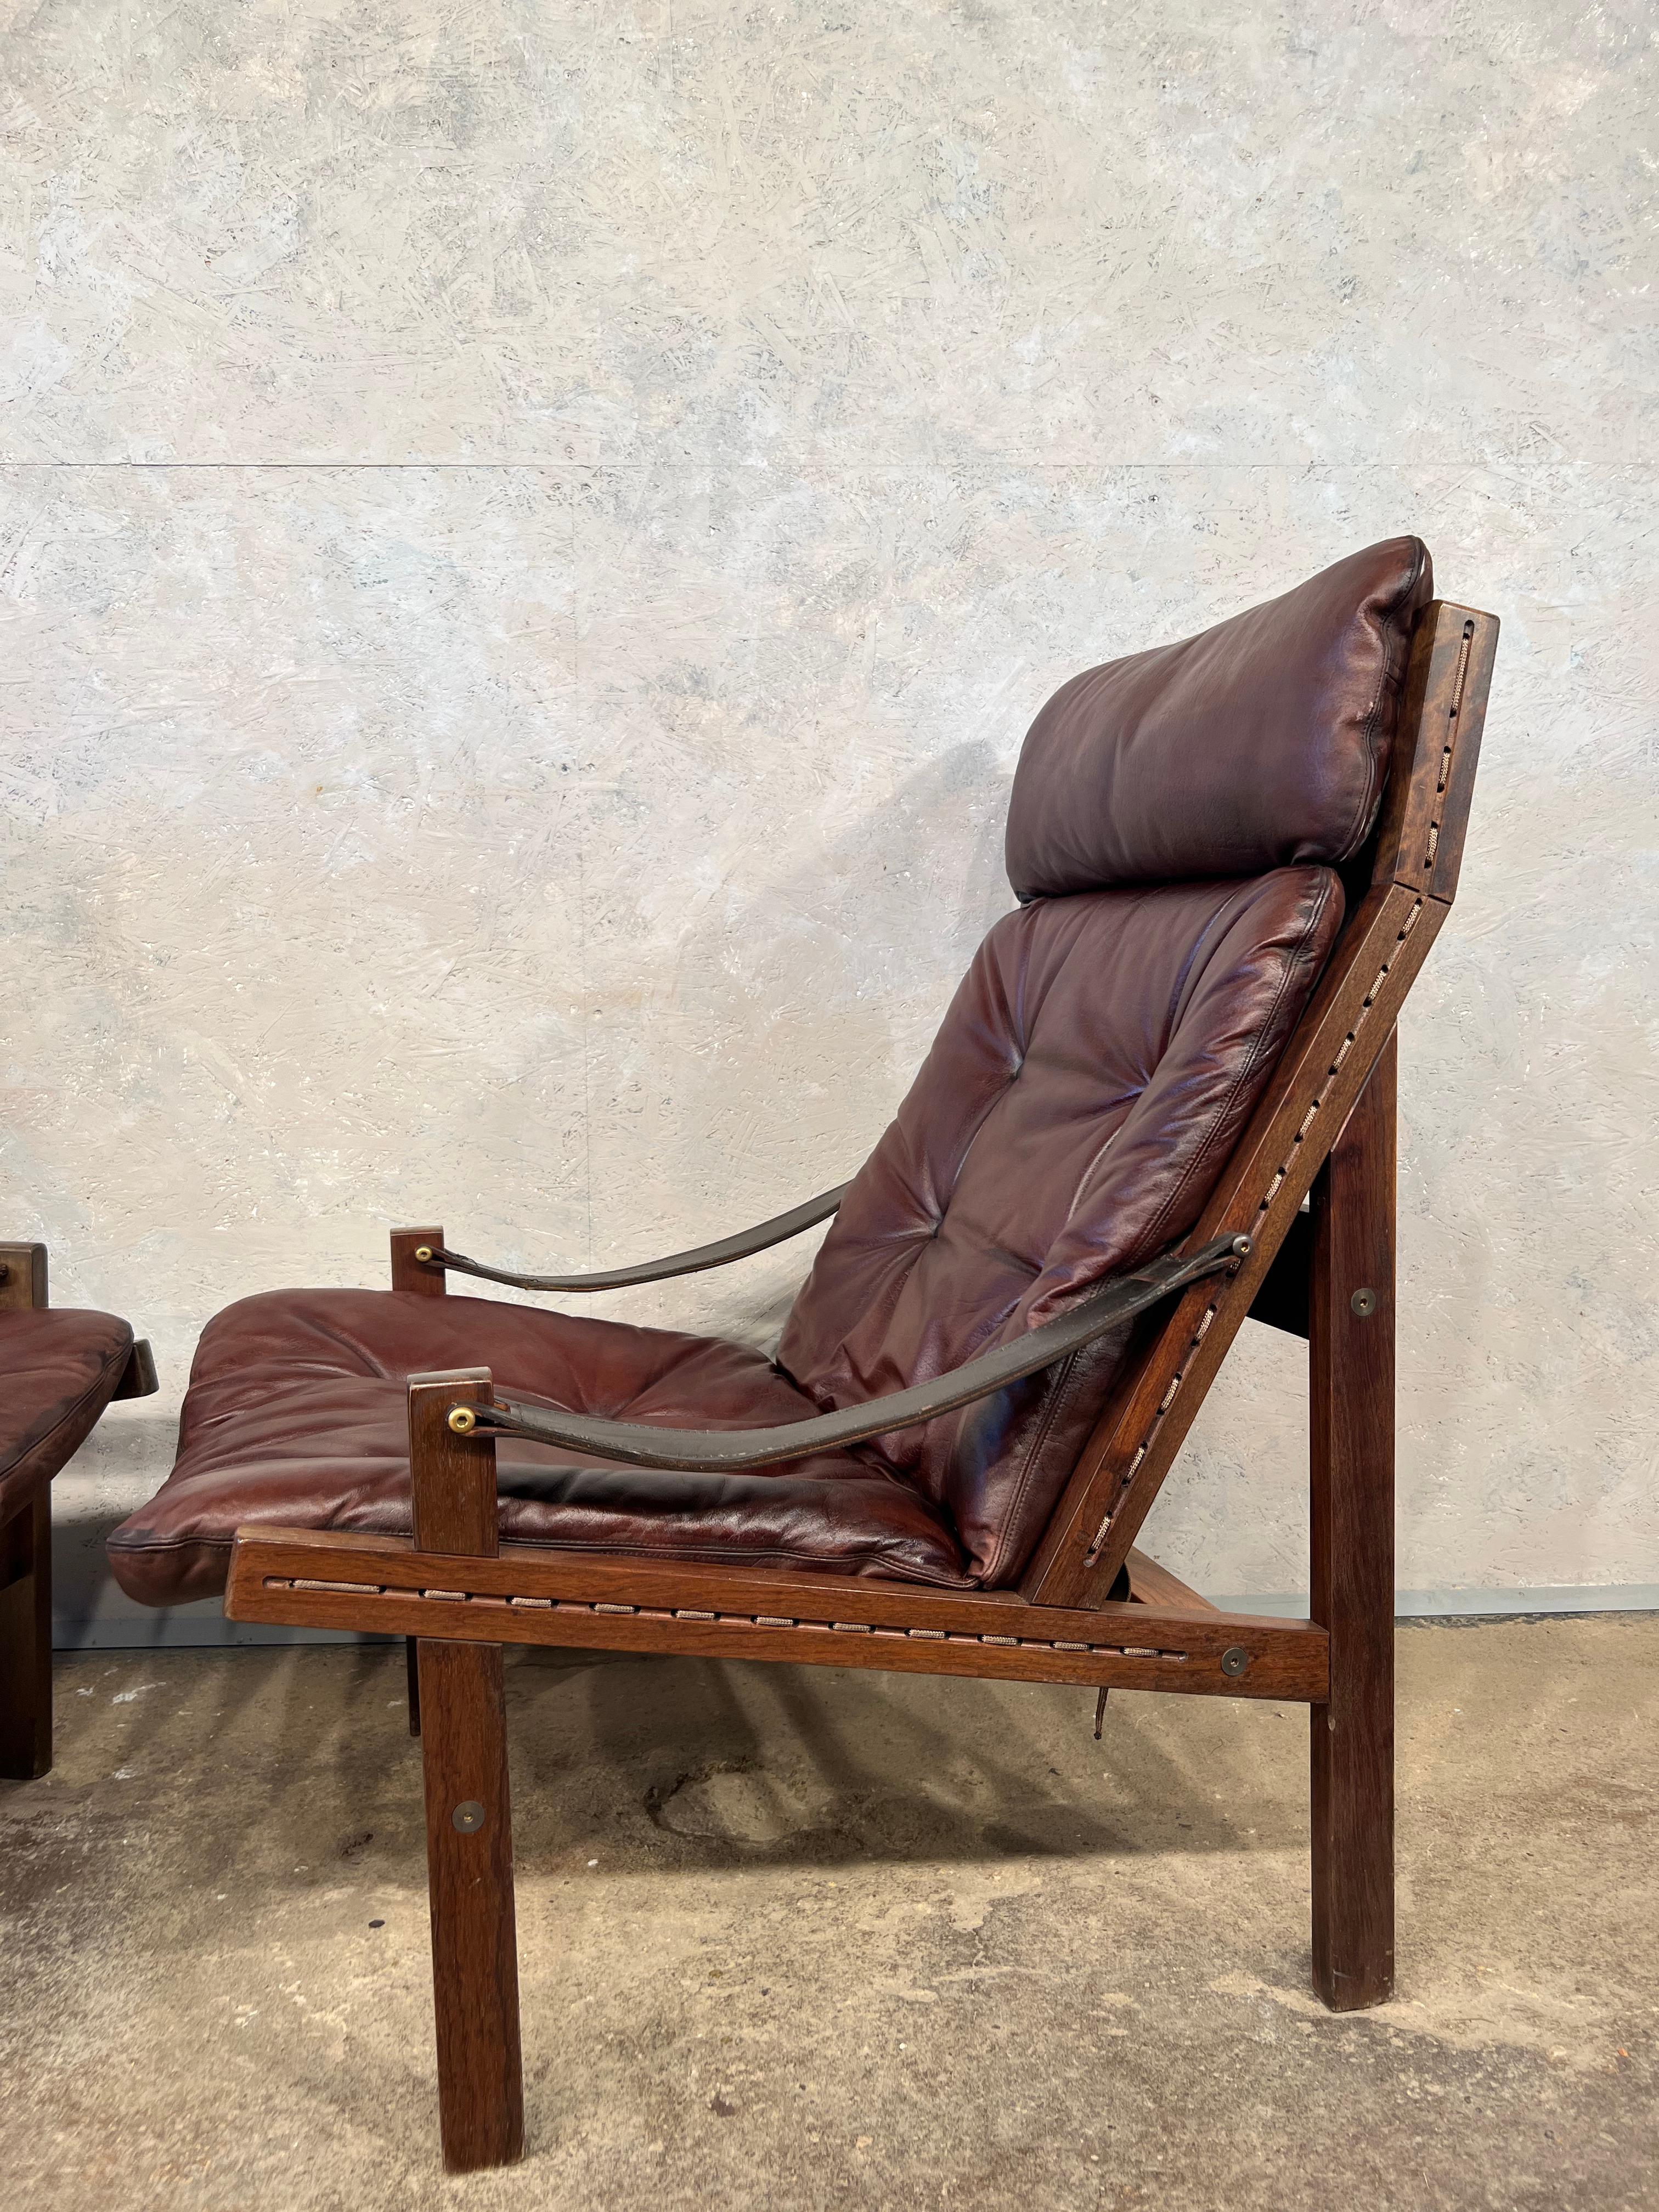 20th Century Pair of Hunter High-Back Lounge Chairs by Torbjørn Afdal for Bruksbo #526 For Sale